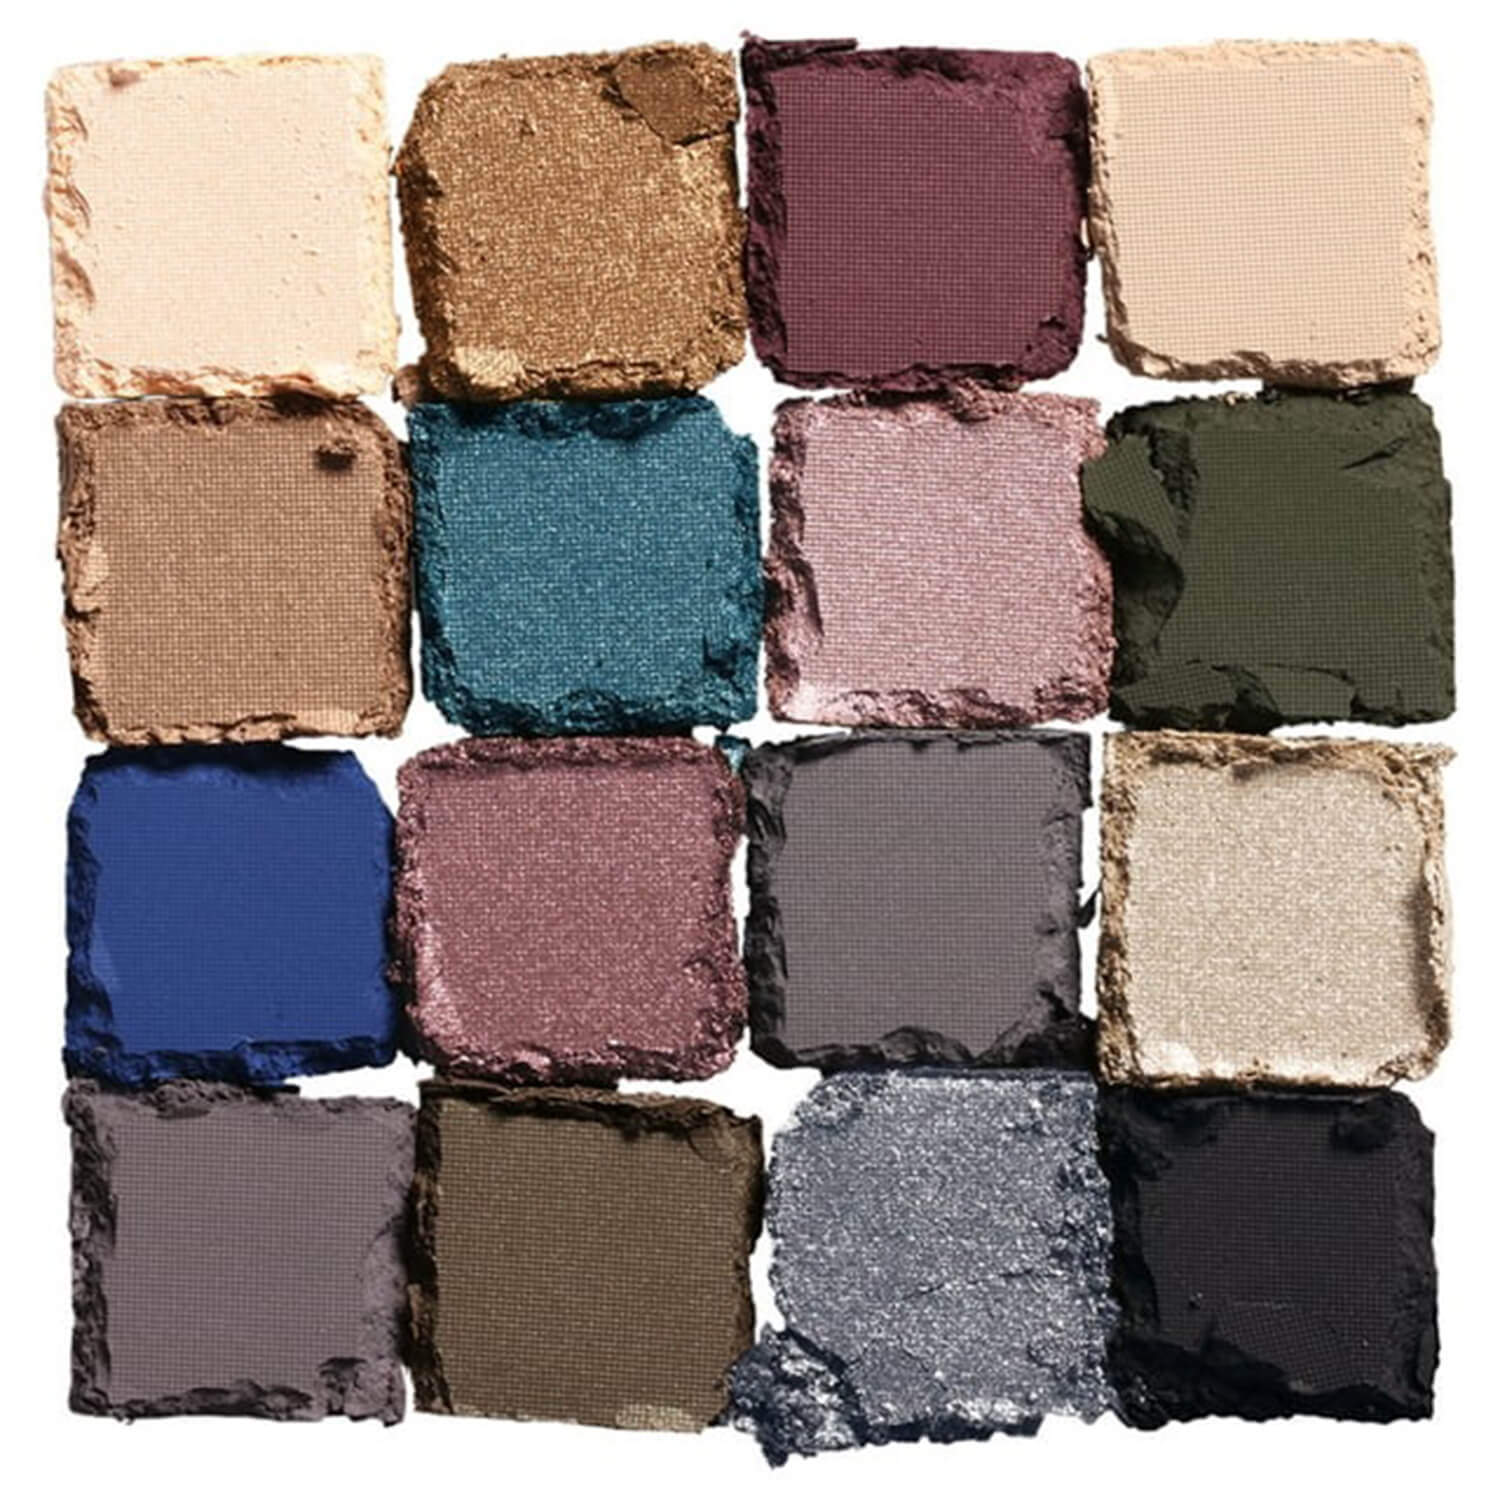 swatch of NYX makeup eyeshadow palette in ash shade available at Heygirl.pk for delivery in Pakistan